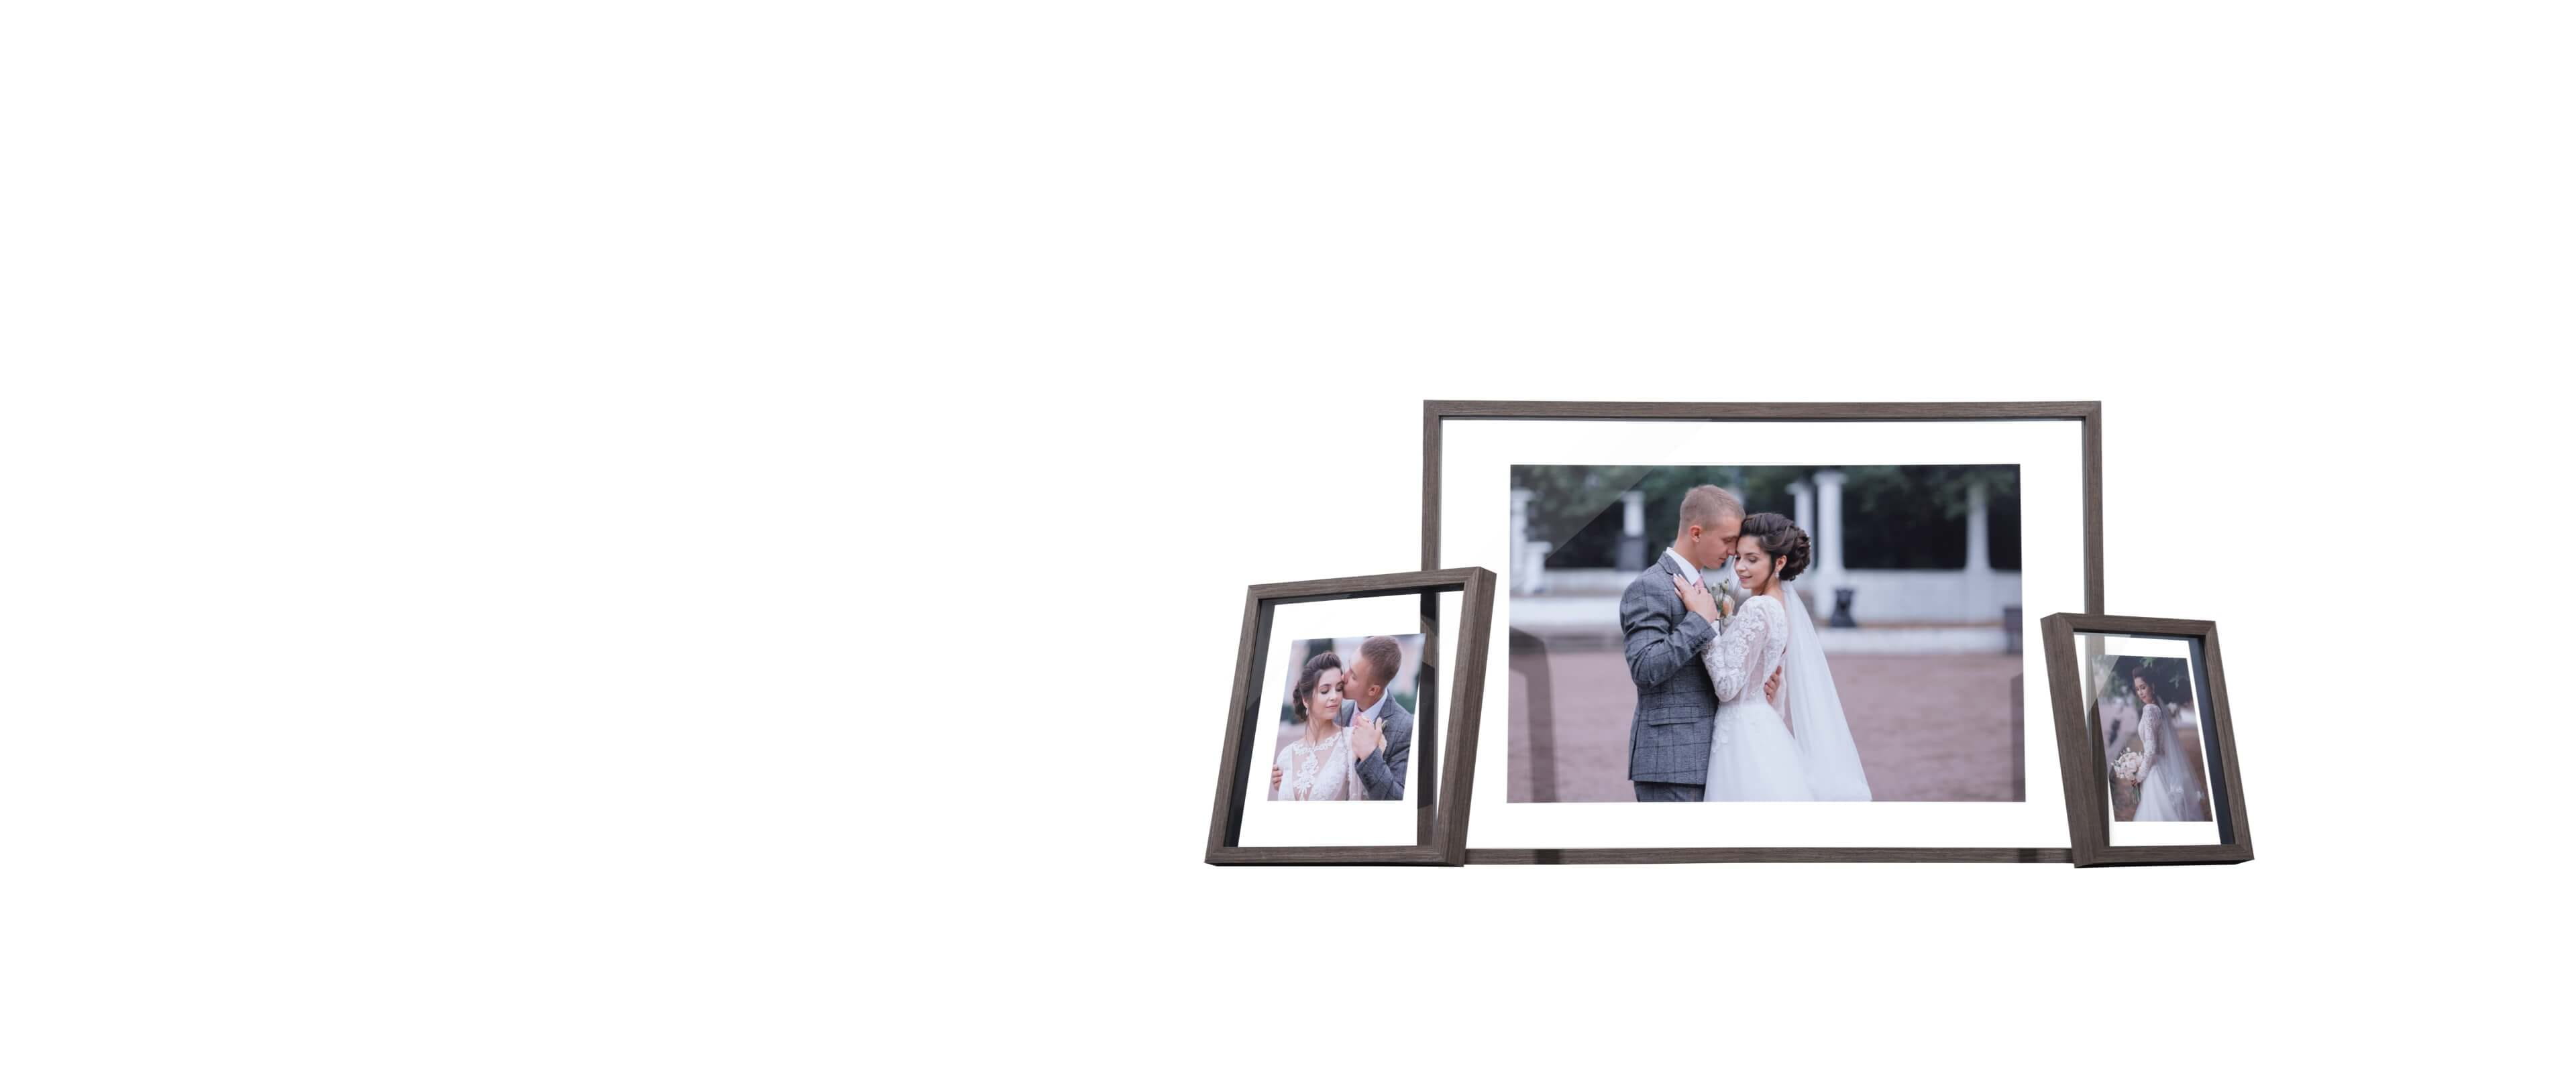 three double glass frames in different sizes showing photos of a wedding couple